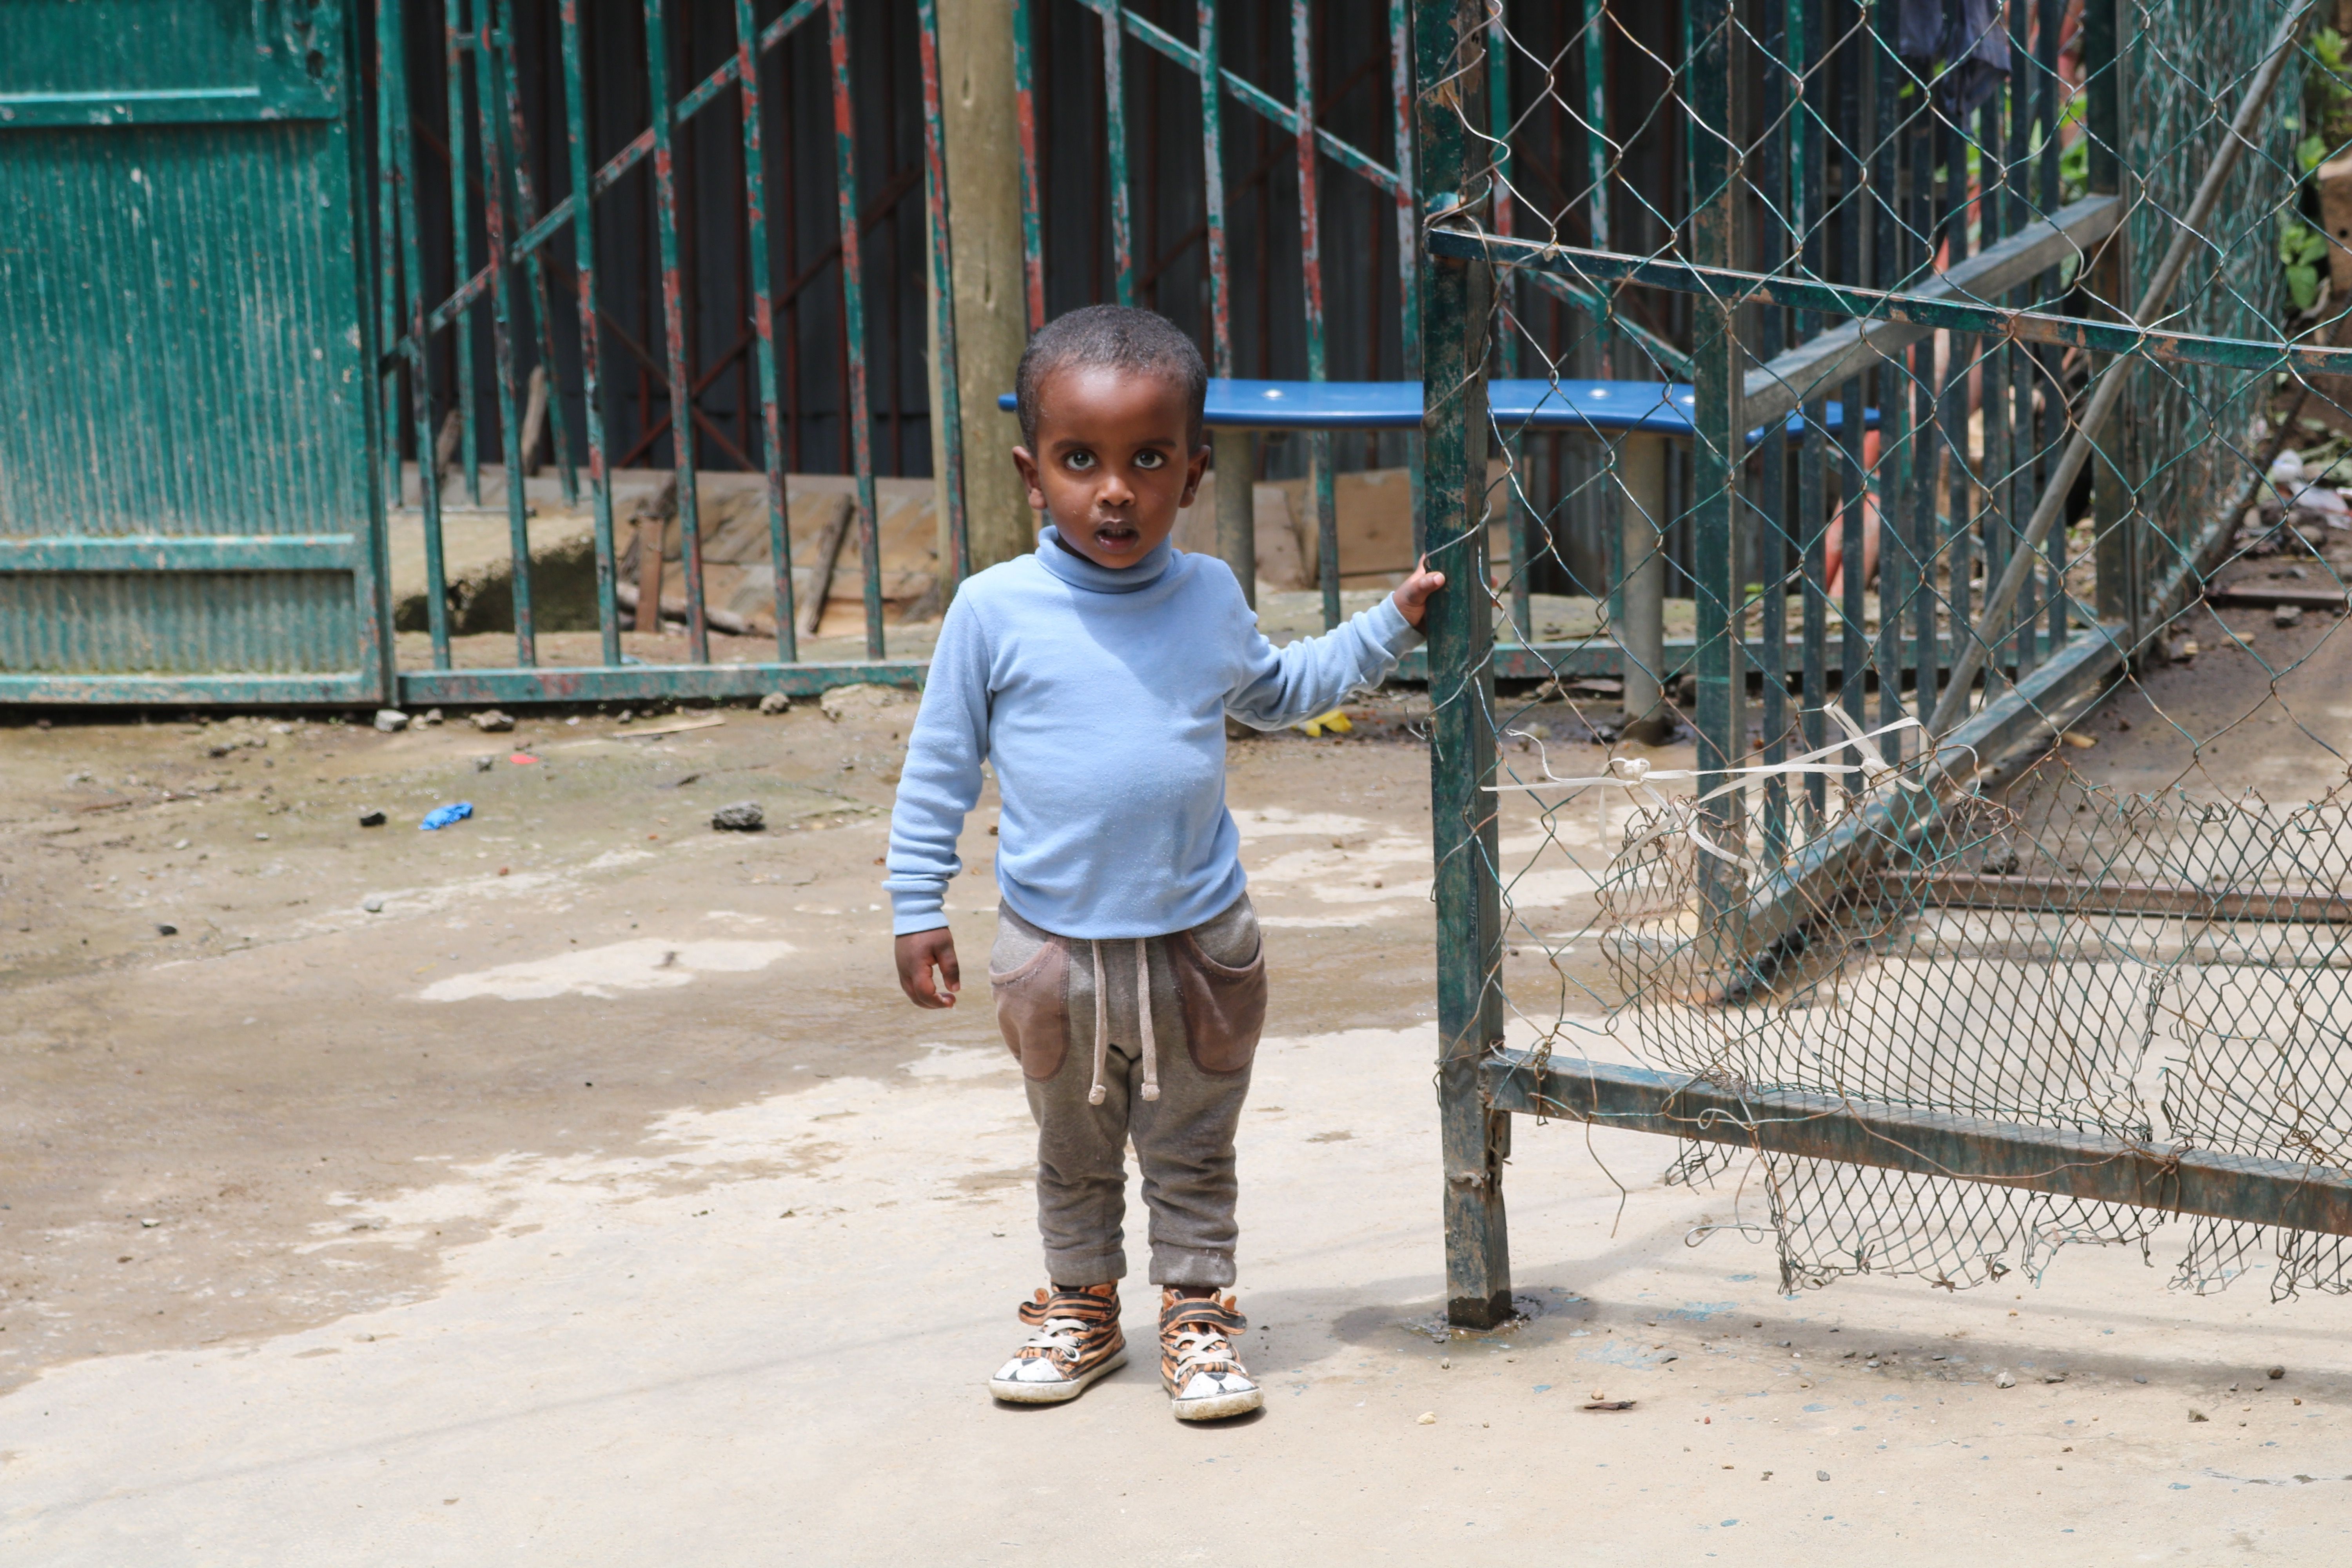 A young boy stands by the gate waiting to go inside to have lunch. He will spend his life in the orphanage unless he is locally adopted. Image by Abigail Bekele. Ethiopia, 2018.